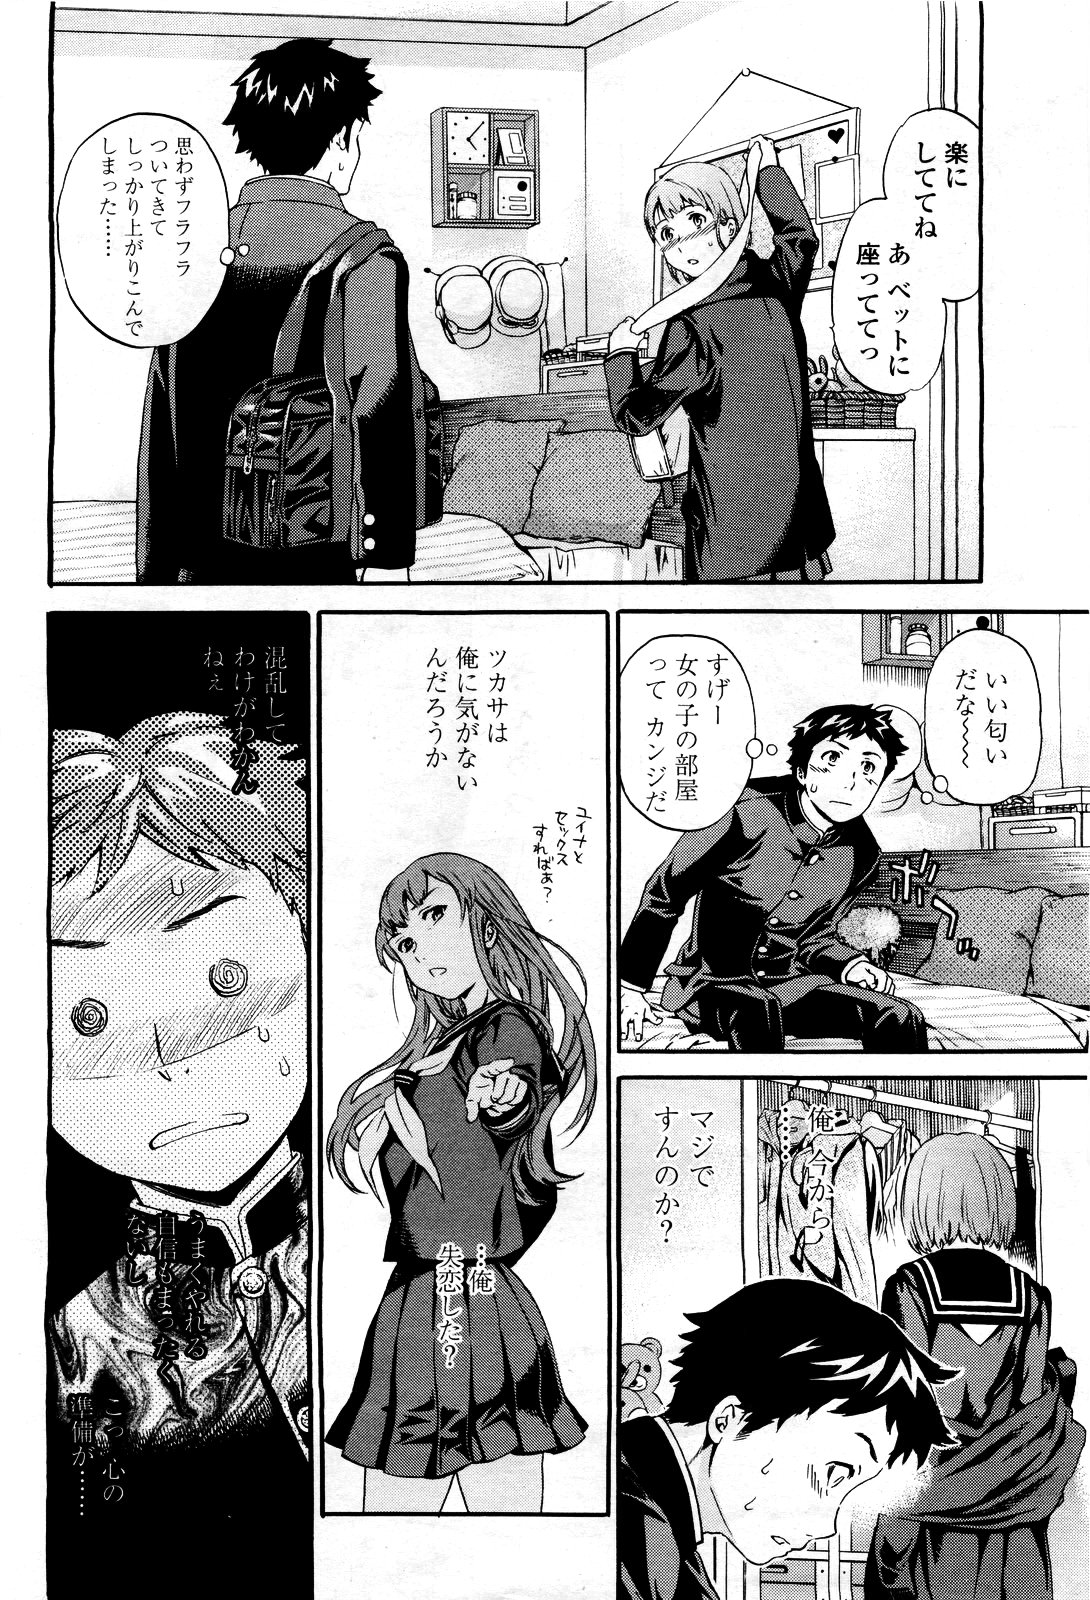 COMIC Momohime 2010-03 Vol. 113 page 26 full